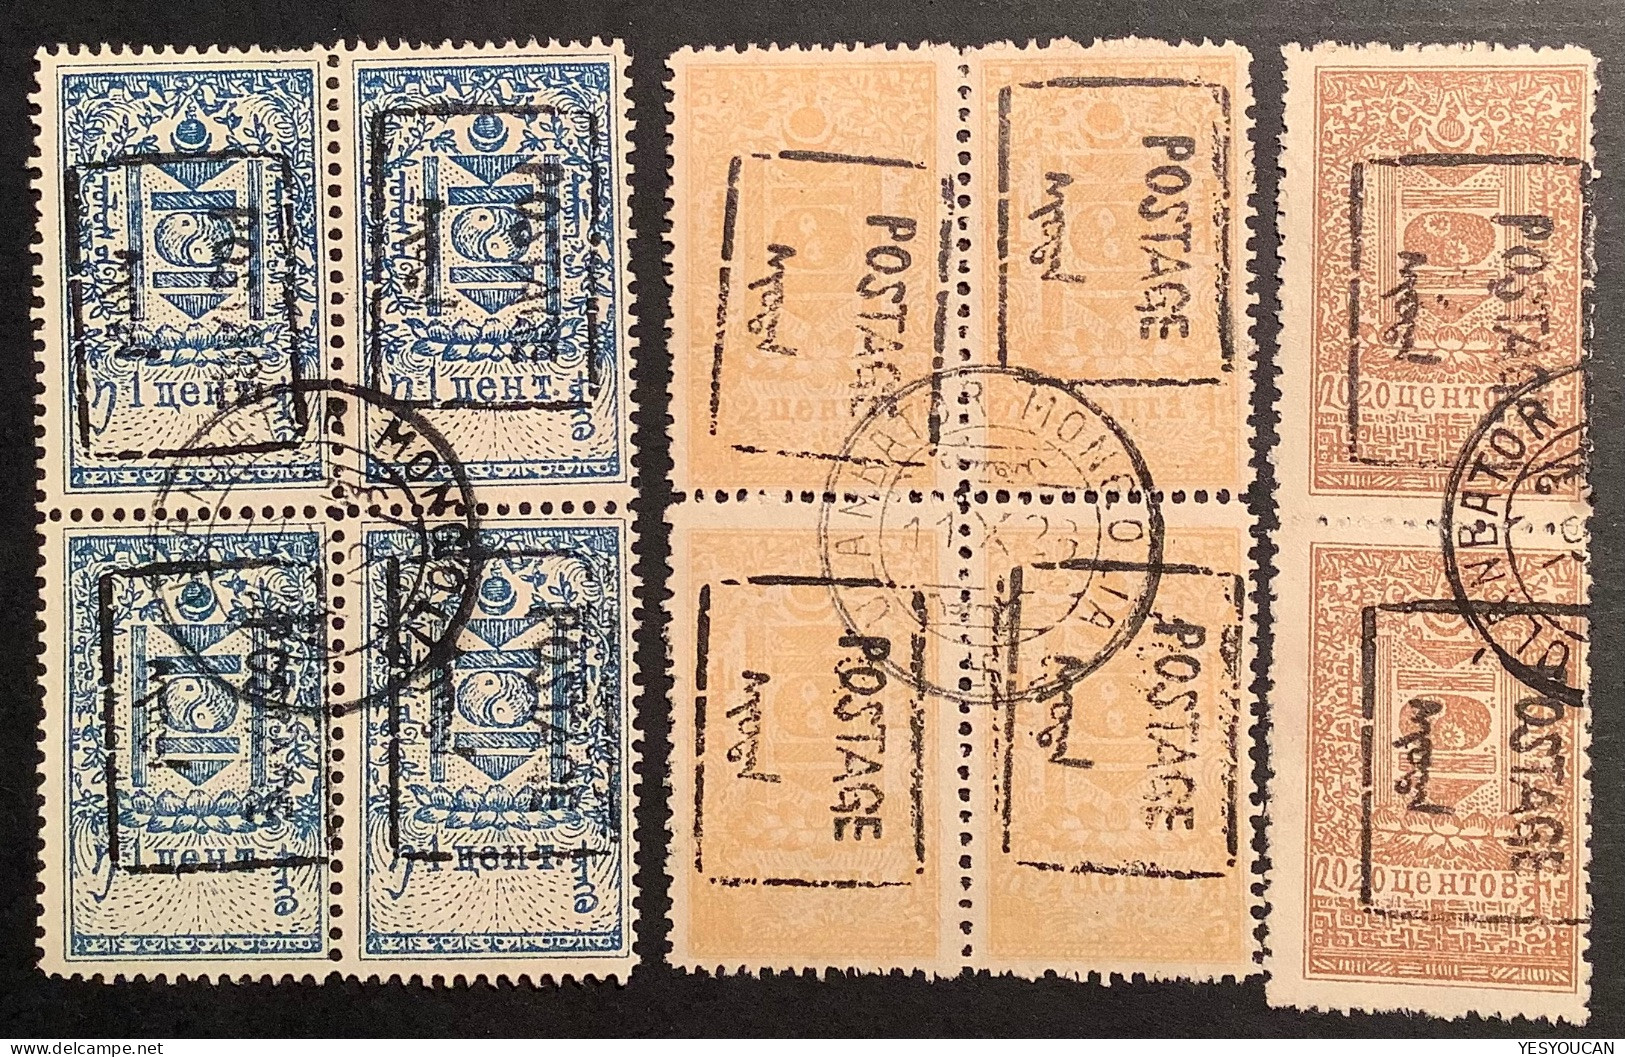 Mongolia 1926 Ten Revenue Stamps With Postage Ovpt Incl. Block Of Four Used, VF Sc.16a, 17a, 20a - Mongolei